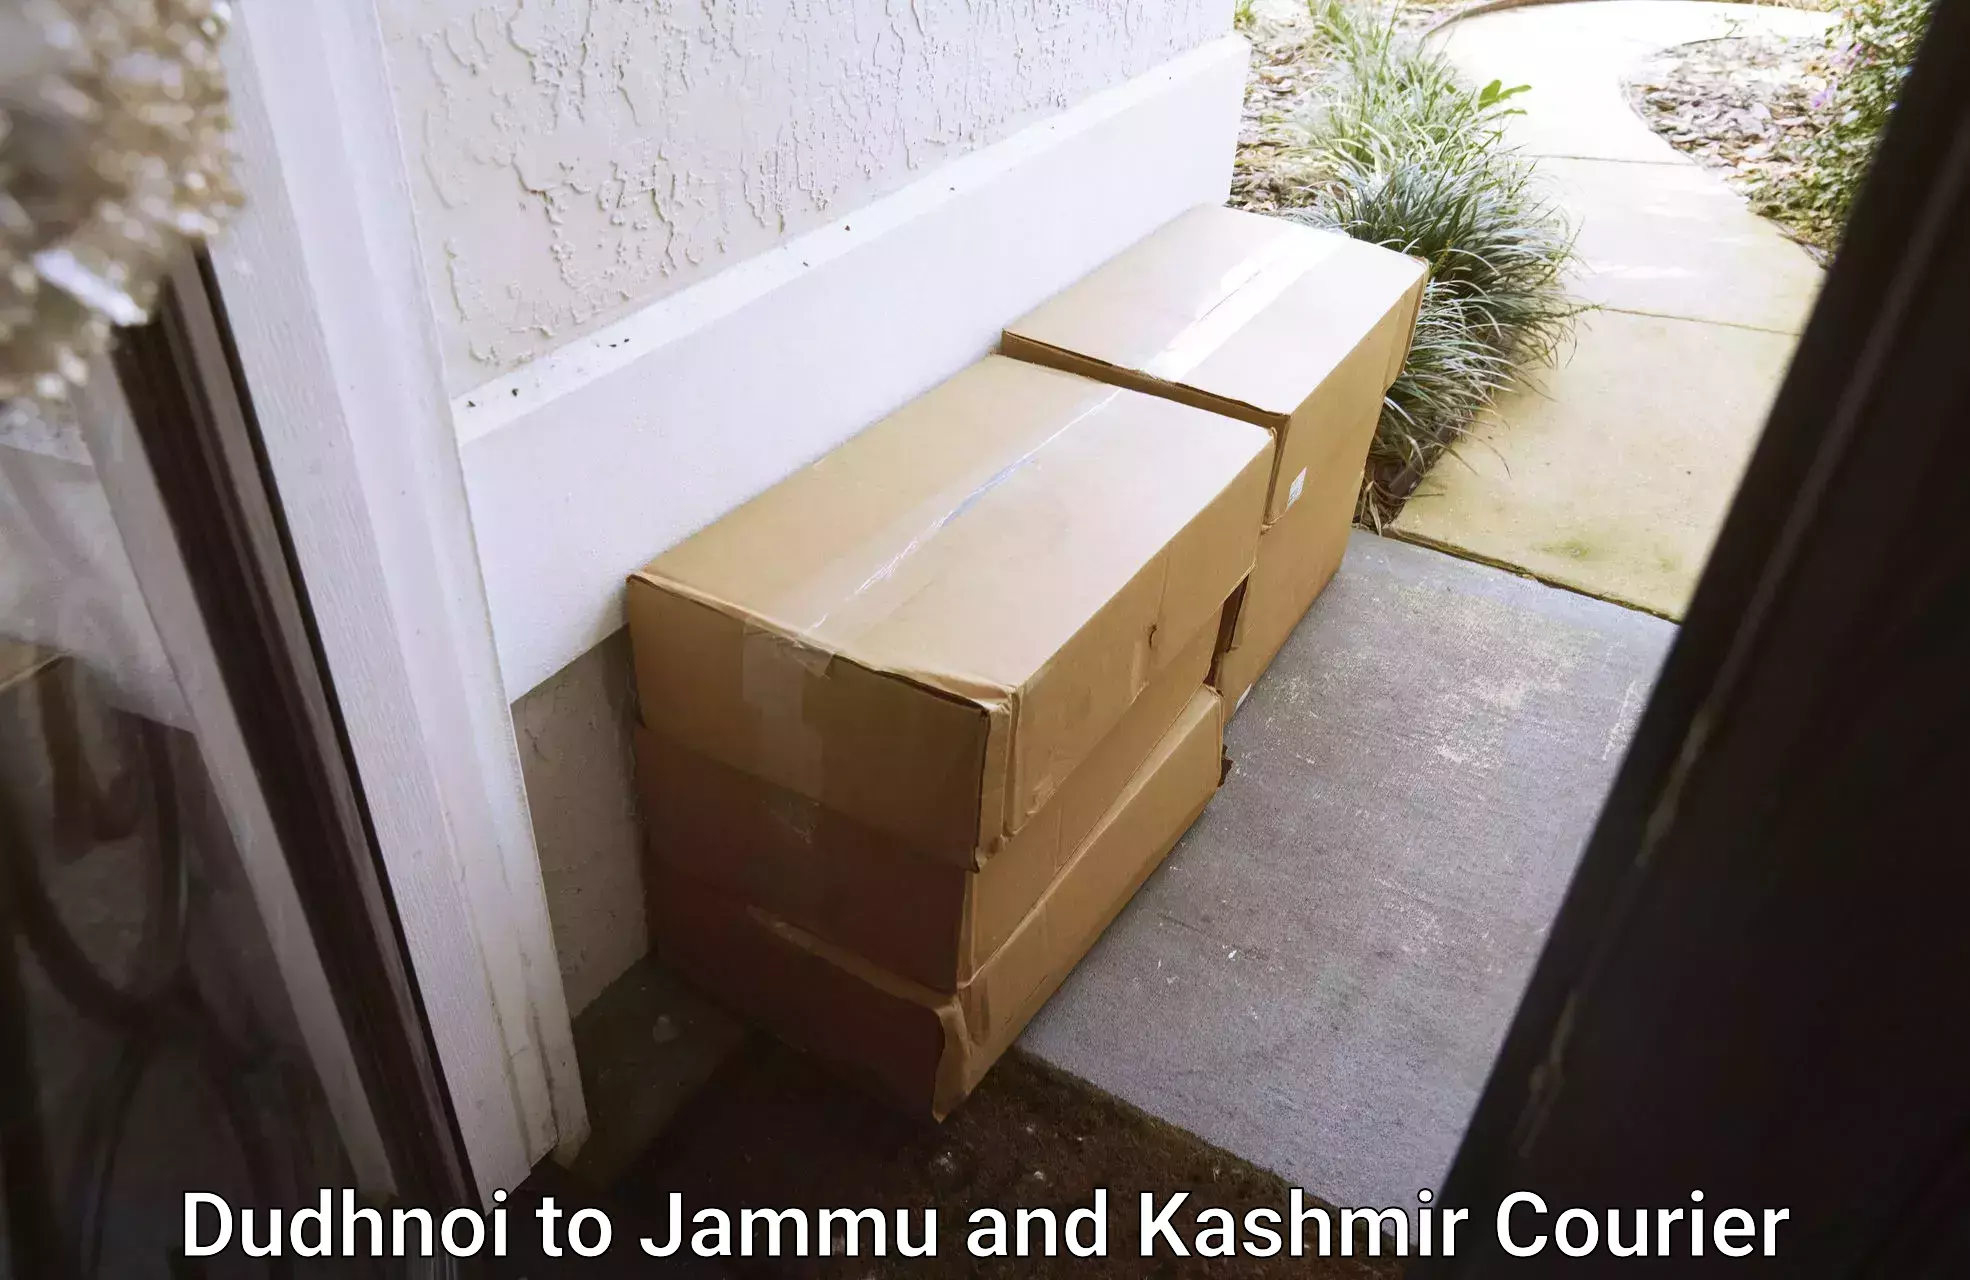 Streamlined delivery processes Dudhnoi to Jammu and Kashmir